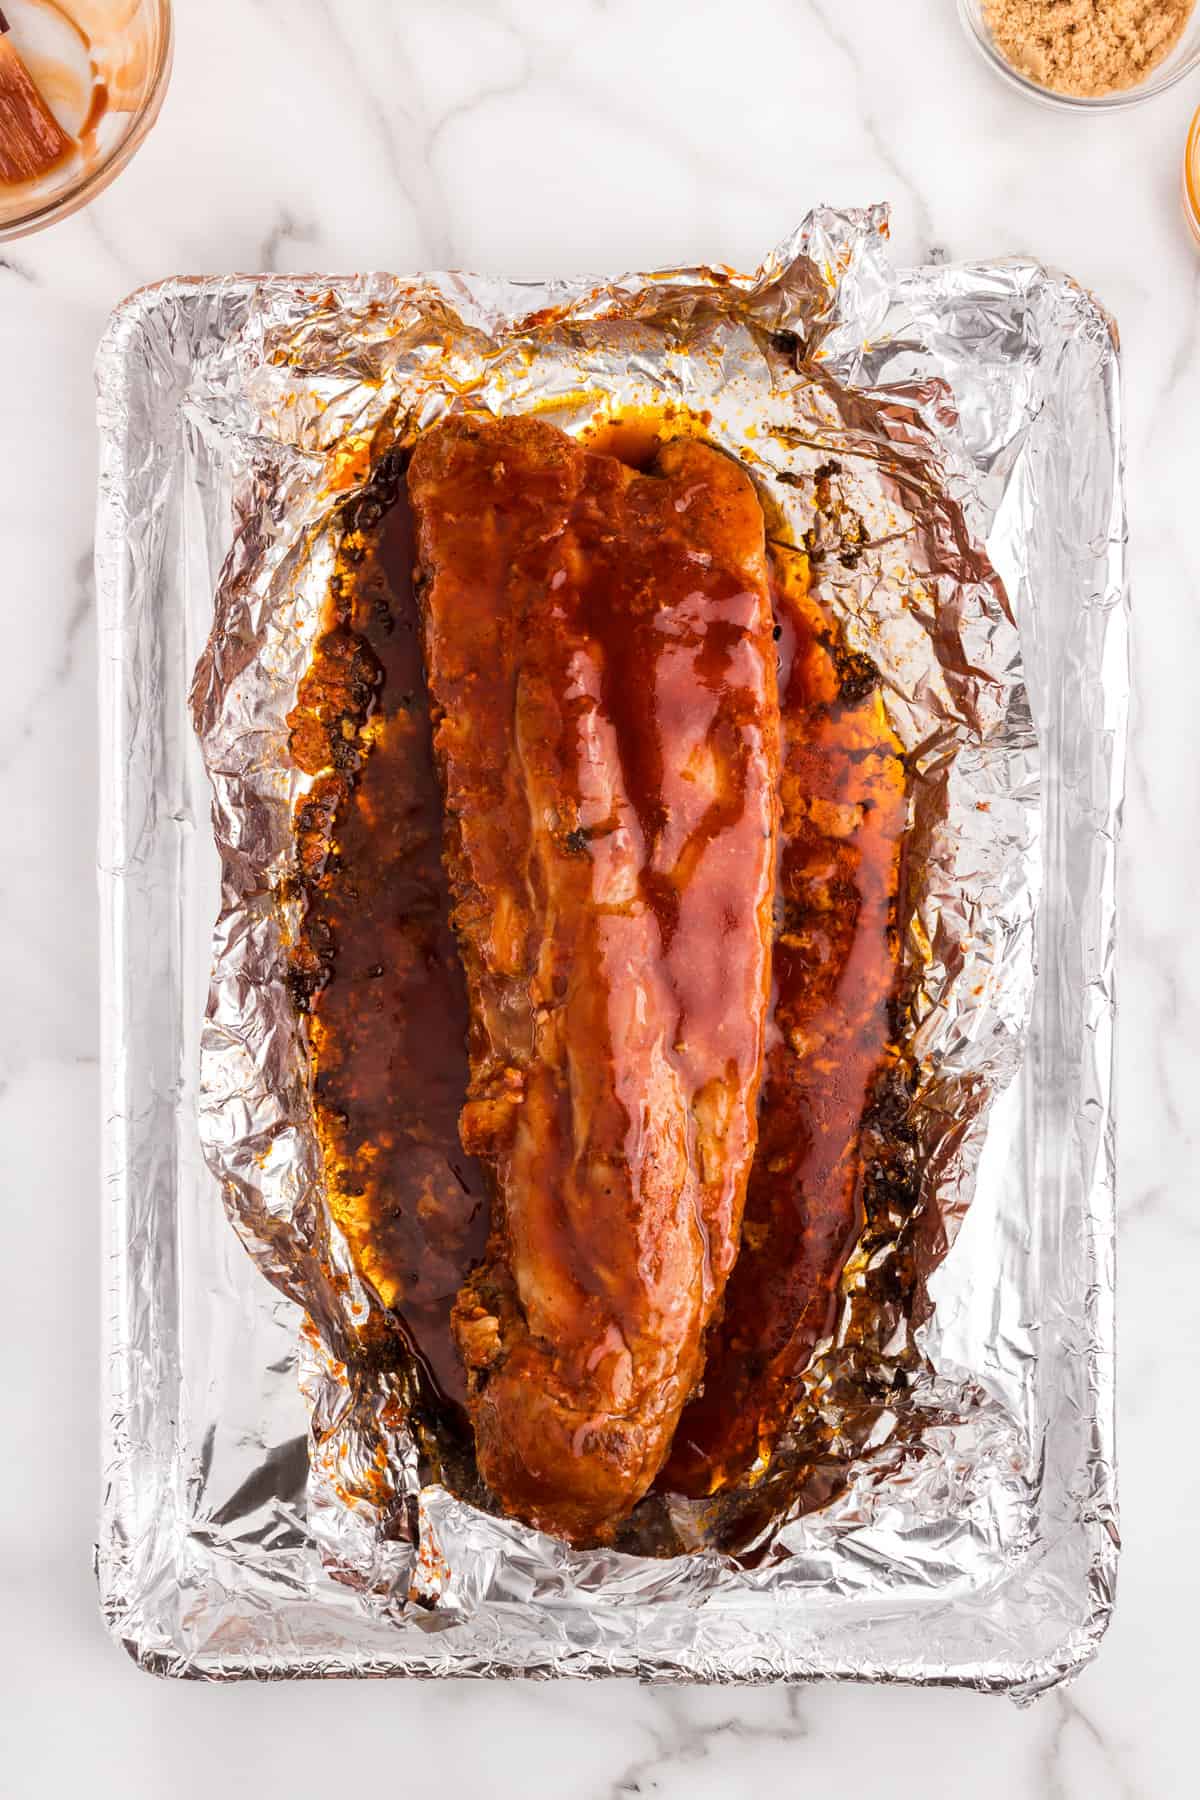 Unwrapping Oven Baked Ribs after baking to add BBQ sauce